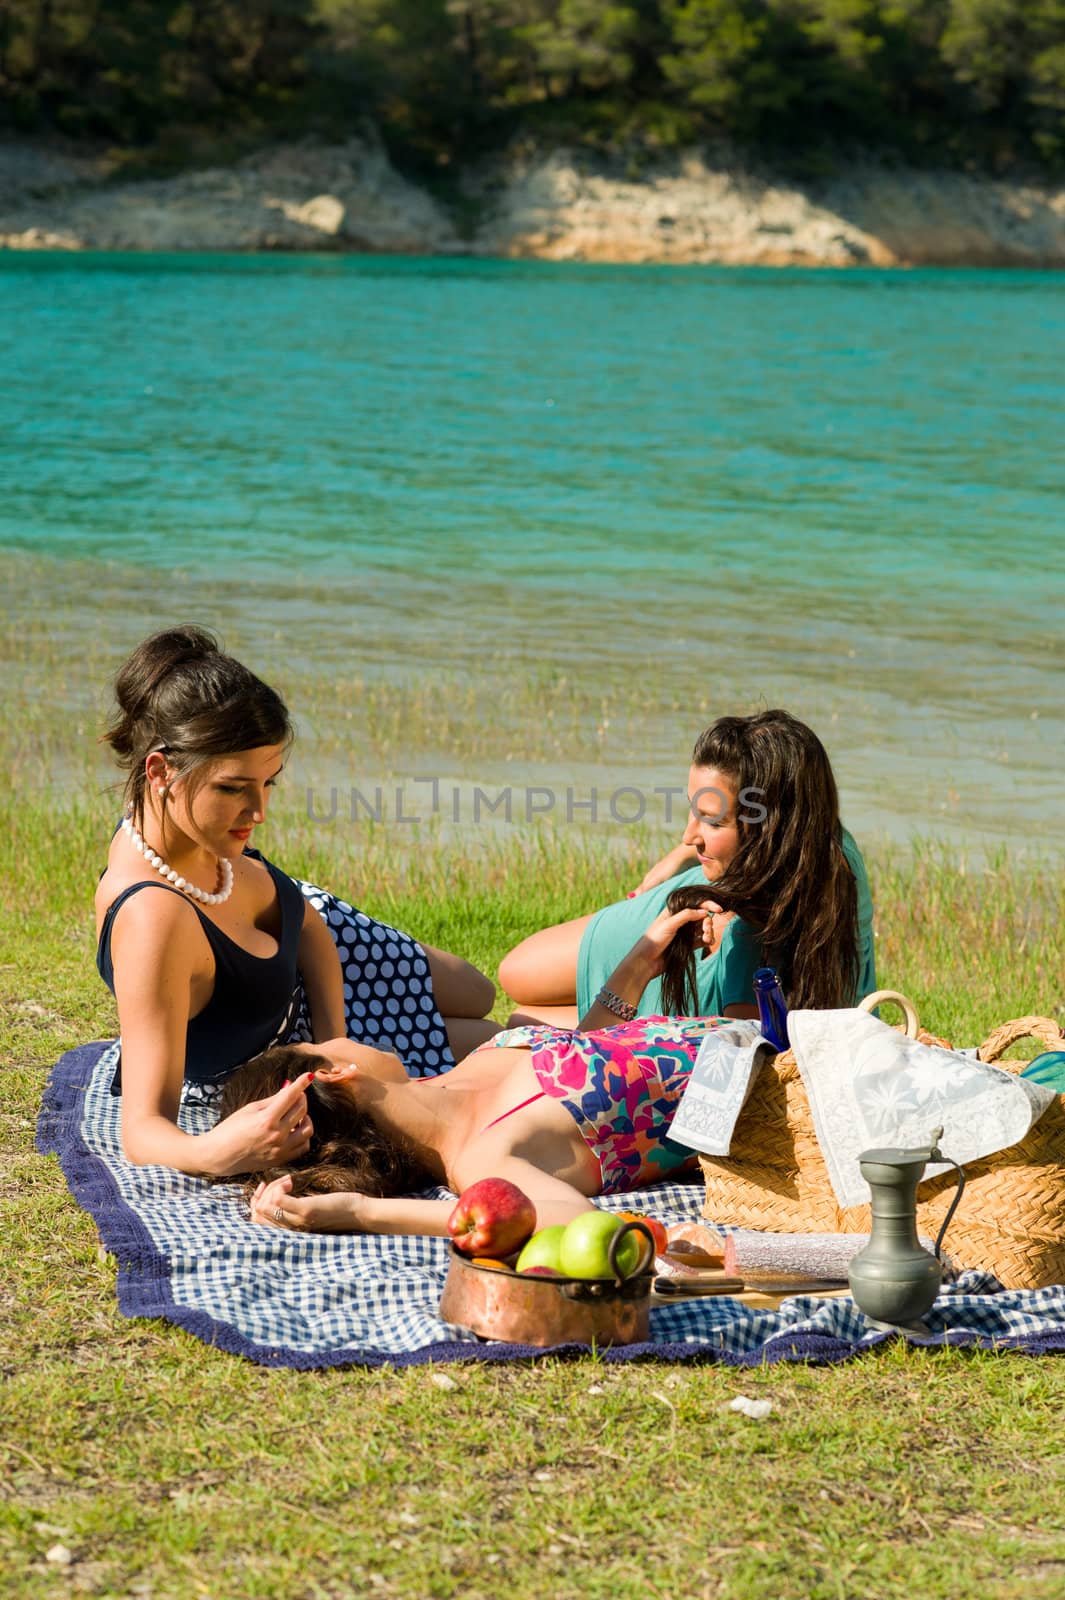 Girls resting after an ejoyable picnic outdoors